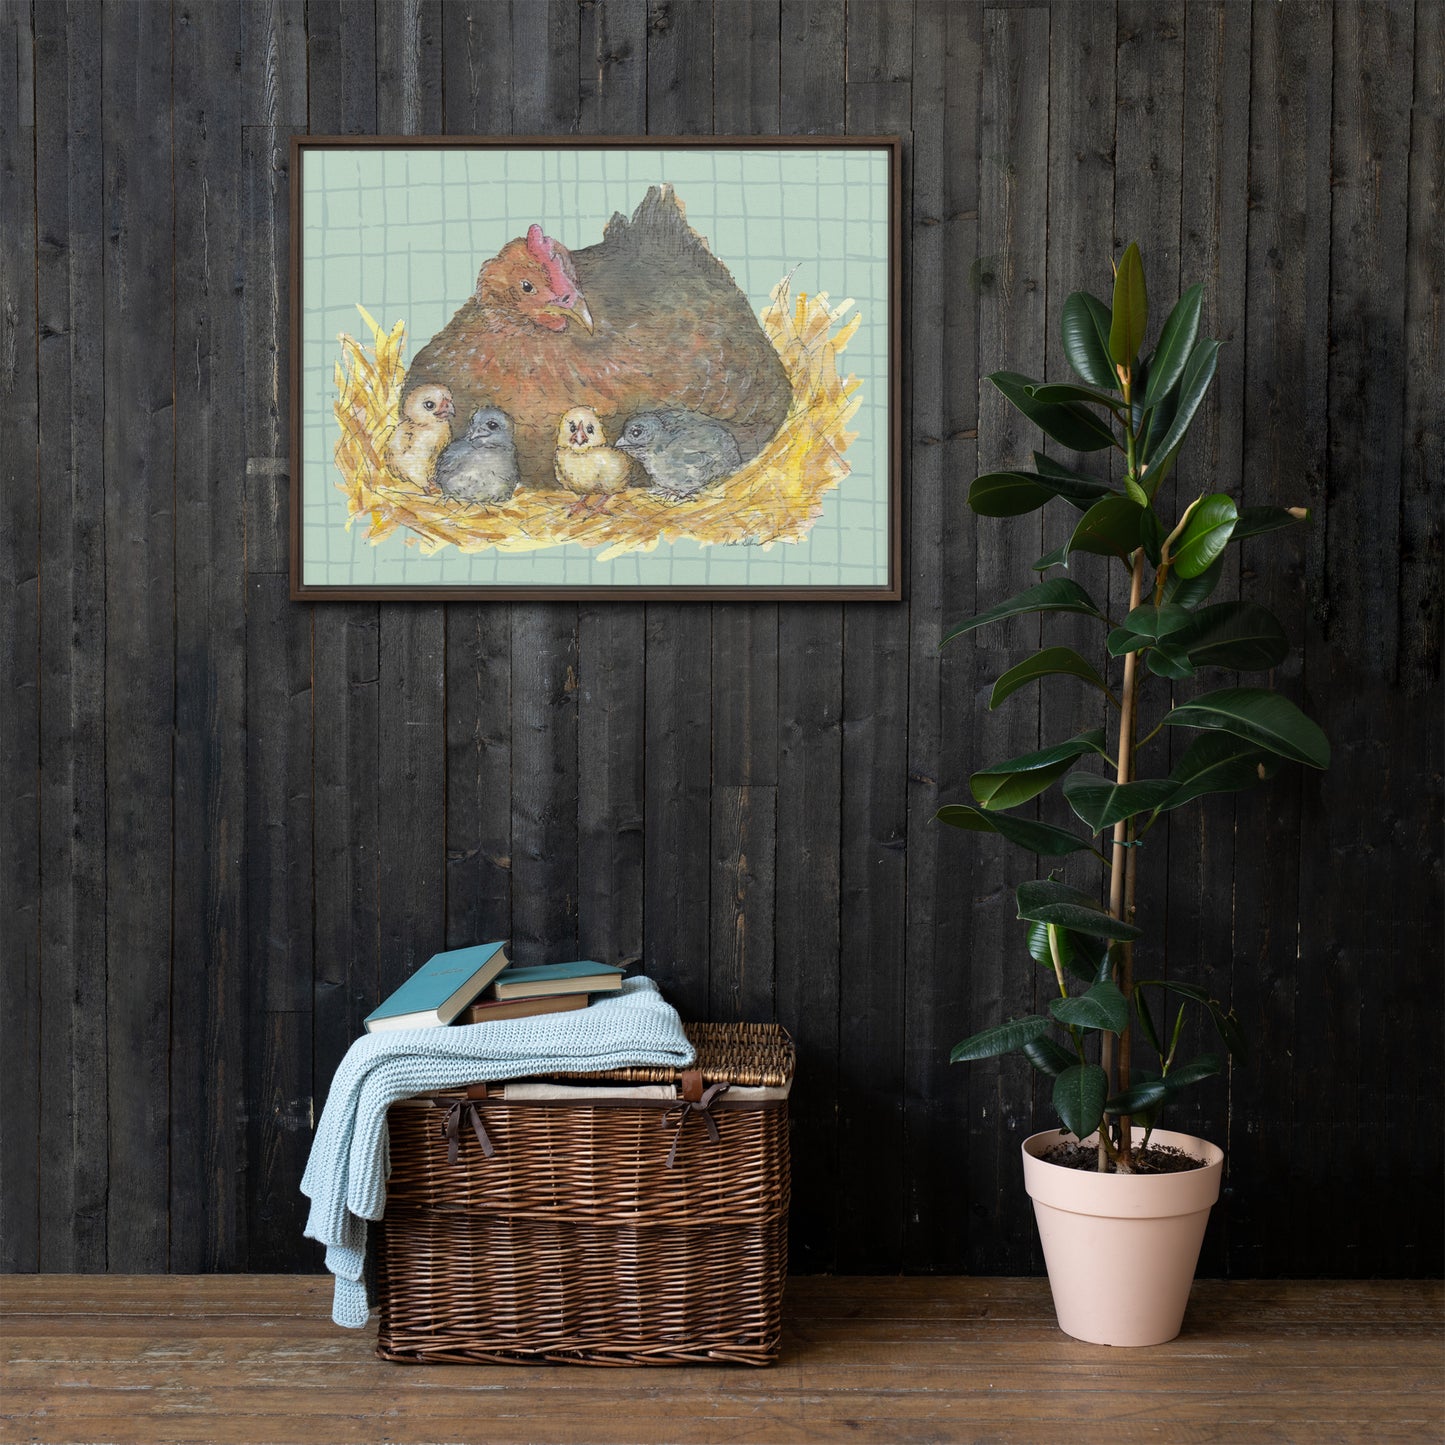 24 by 32 inch Mother Hen Floating Frame Canvas Wall Art. Heather Silver's watercolor painting, Mother Hen, with a green crosshatched background, printed on a stretched canvas and framed with a dark brown pine frame. Shown on wooden panel wall by potted plant.